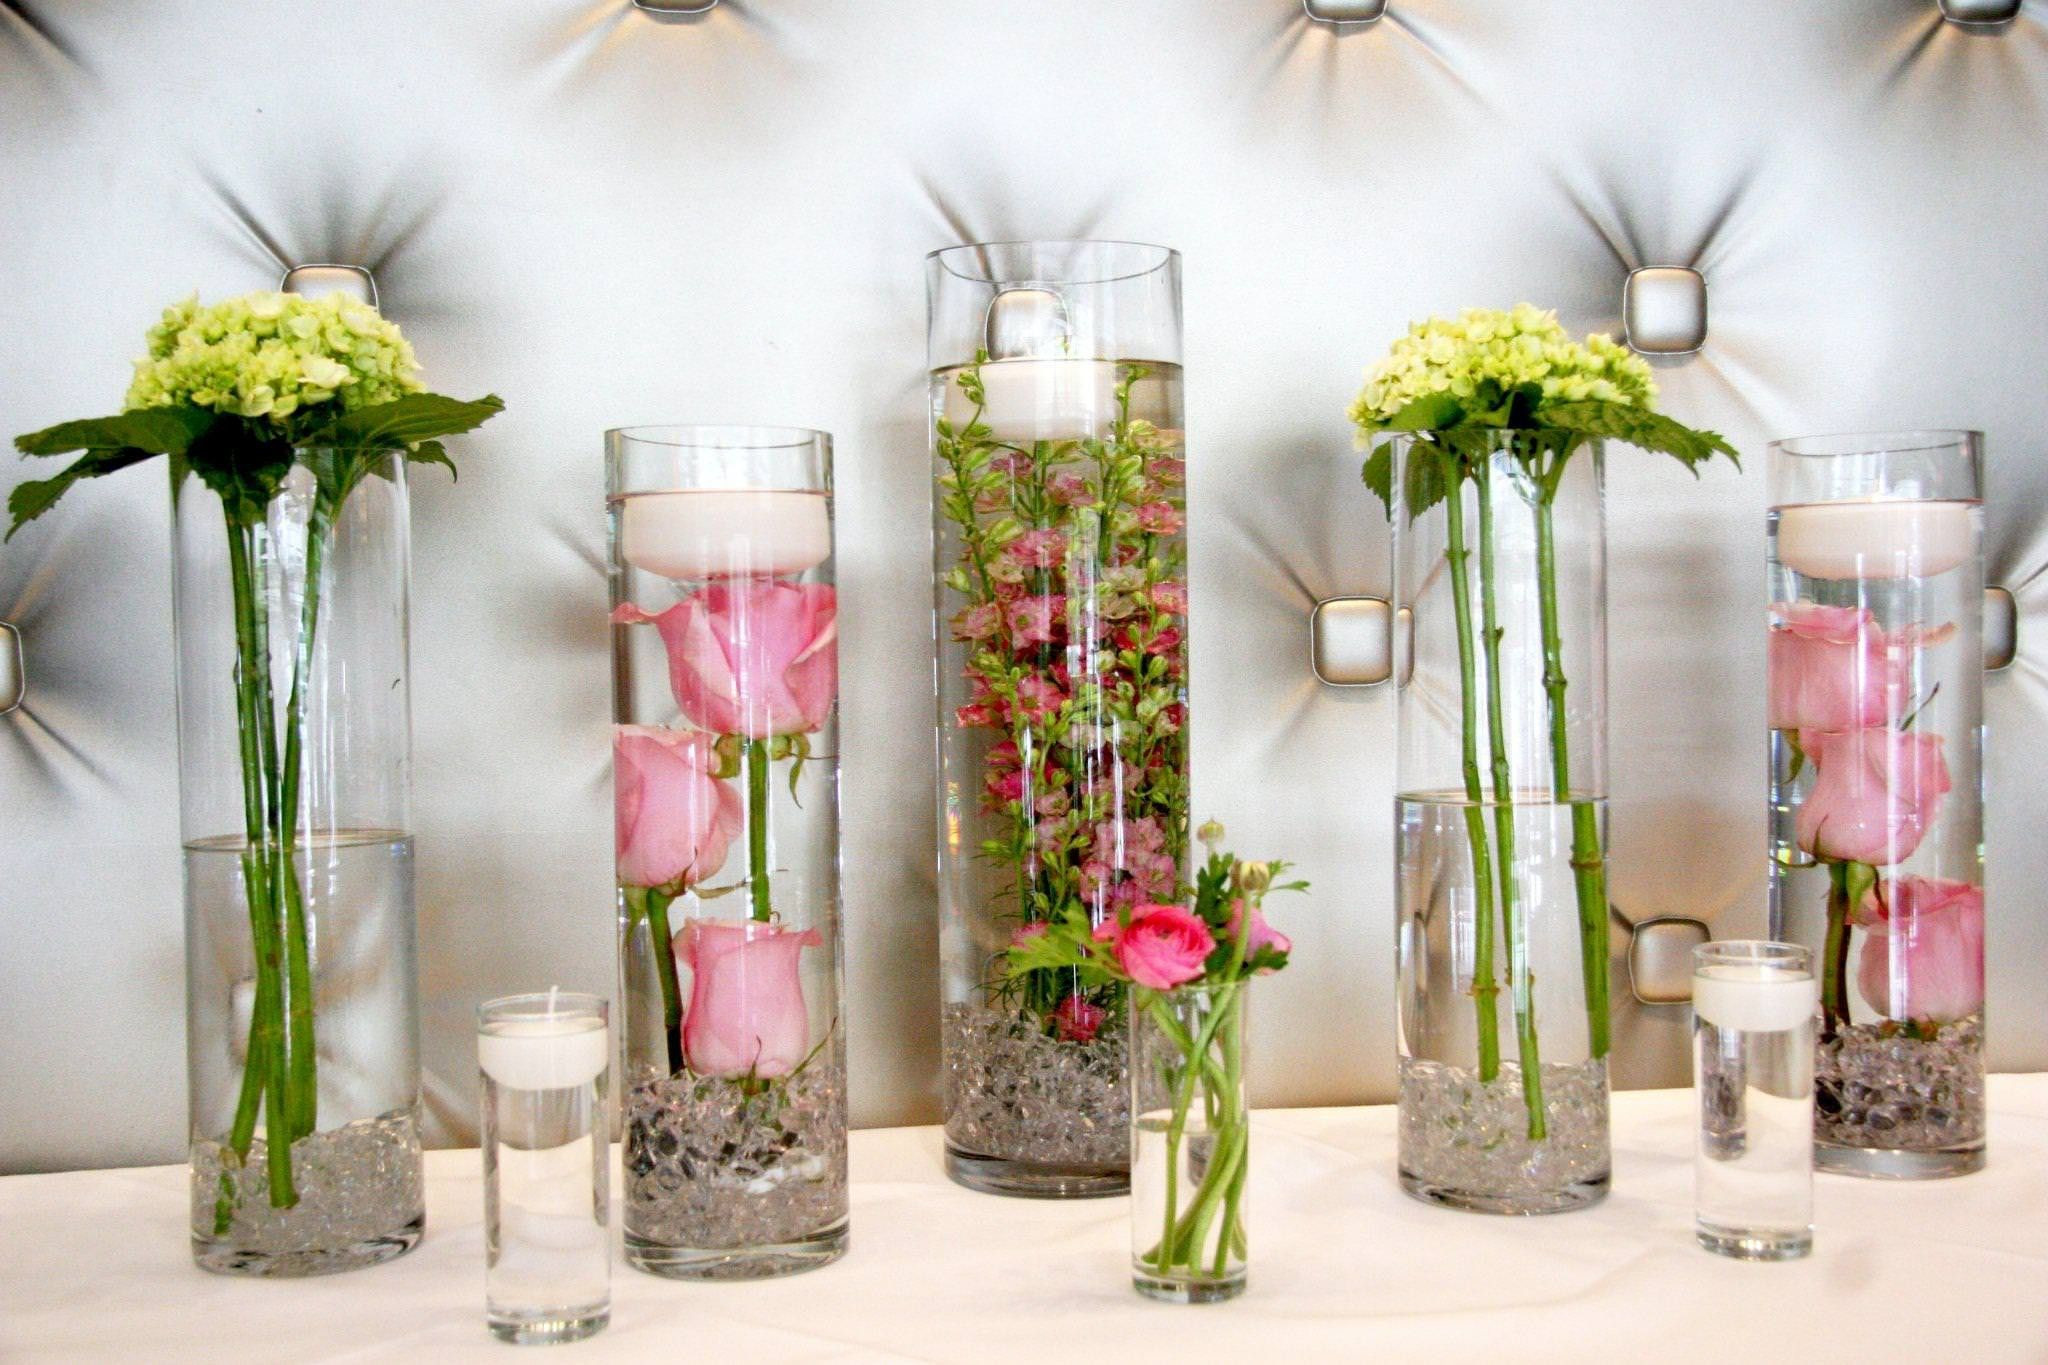 30 Famous Spring Vase Filler Ideas 2024 free download spring vase filler ideas of tall vase fillers elegant decorating ideas for tall vases fresh within tall vase fillers elegant decorating ideas for tall vases fresh floor vase filler ideas